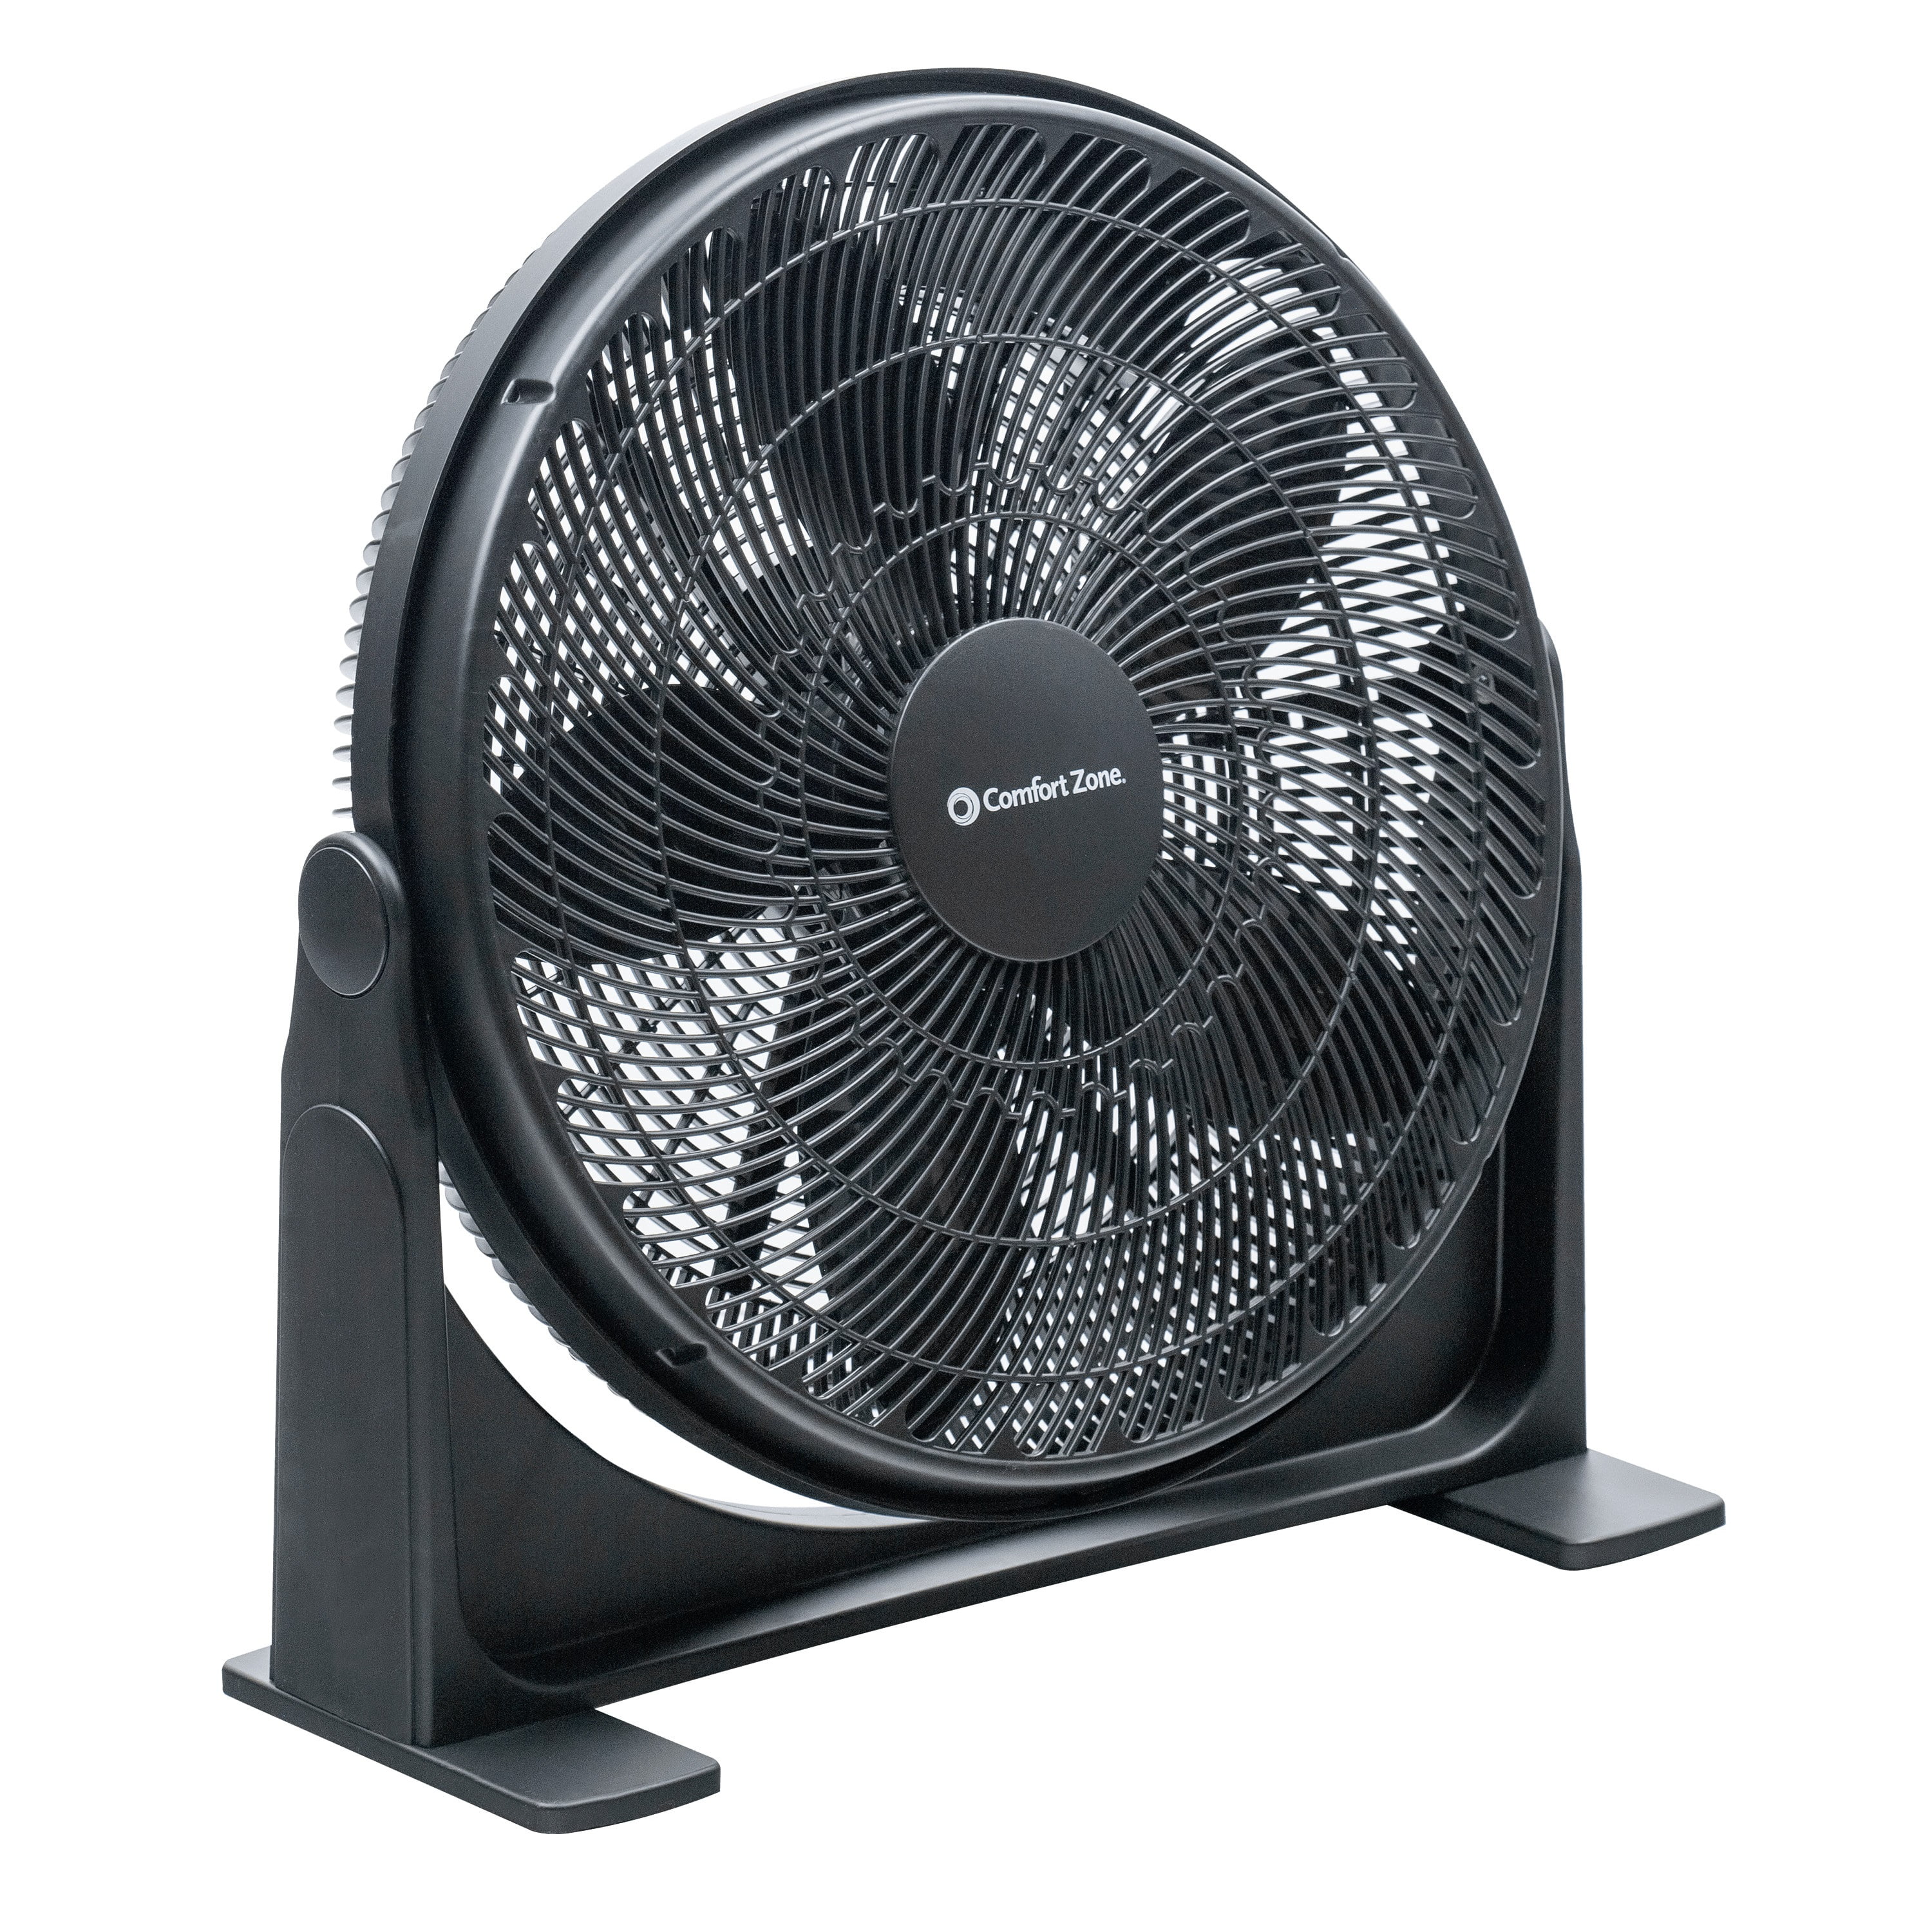 Comfort Zone 20 3-Speed High Velocity Fan with Adjustable Tilt and Sturdy  Base, Black